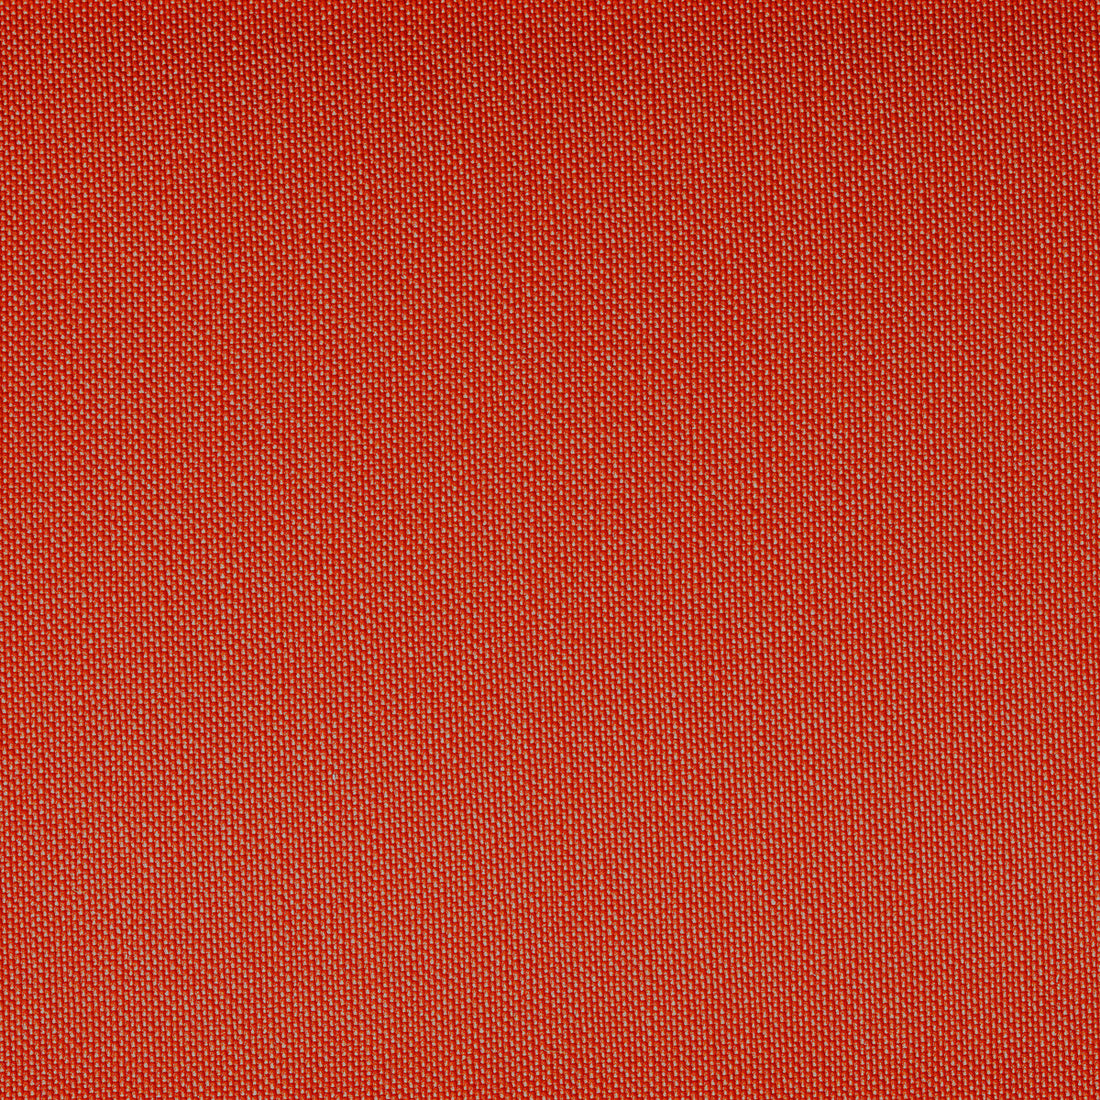 Ventura fabric in persimmon color - pattern VENTURA.24.0 - by Kravet Contract in the Foundations / Value collection